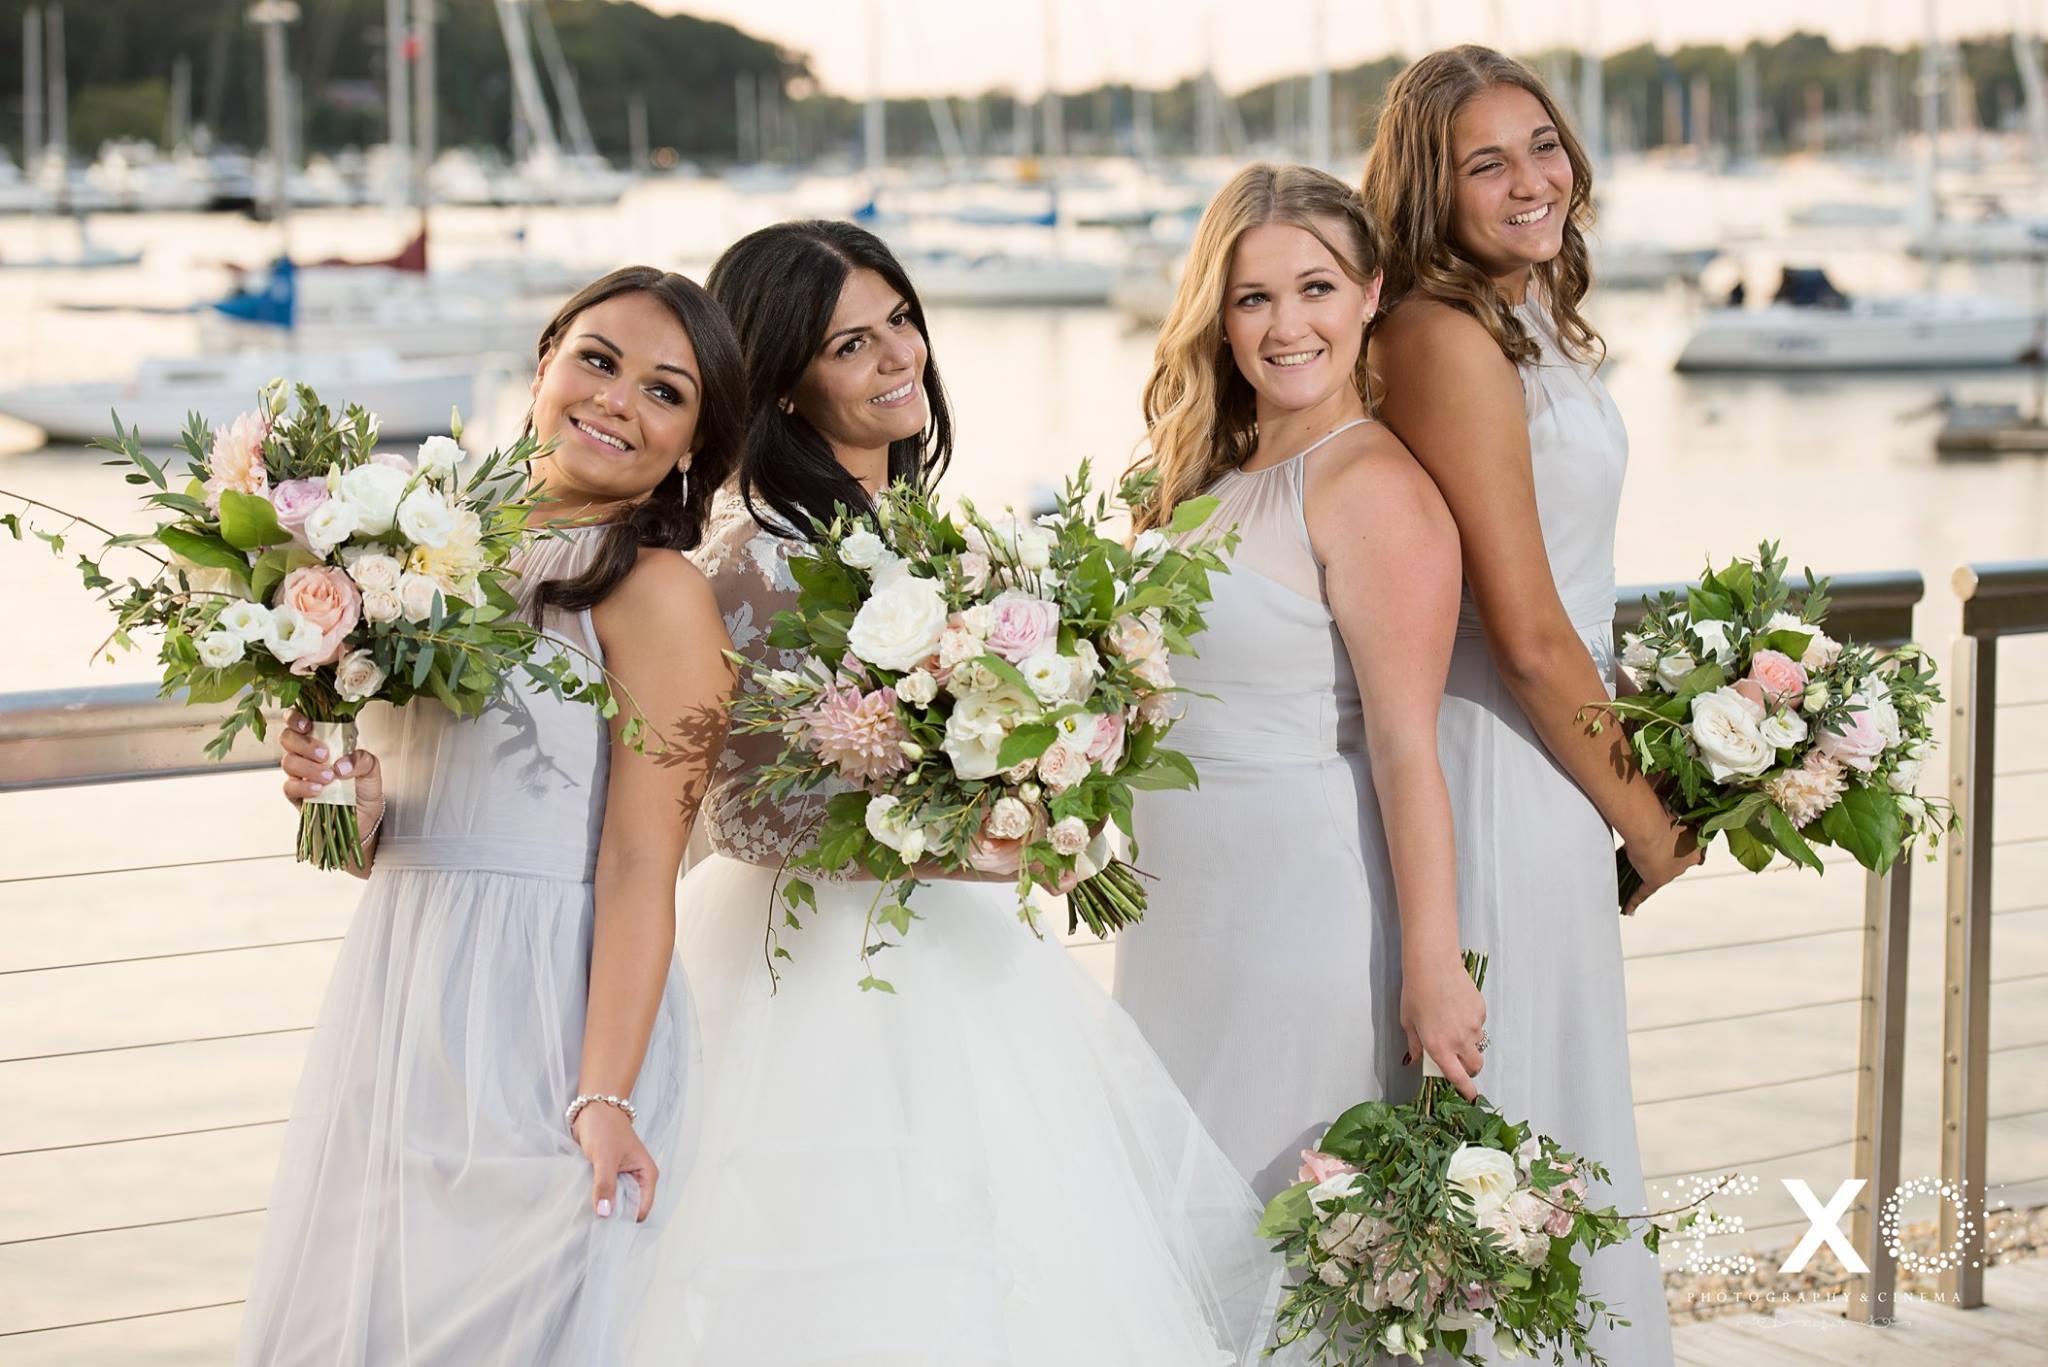 bride wearing kleinfeld bridal gown designed by hayley paige and bridesmaids wearing amsale- nordstroms wedding suite